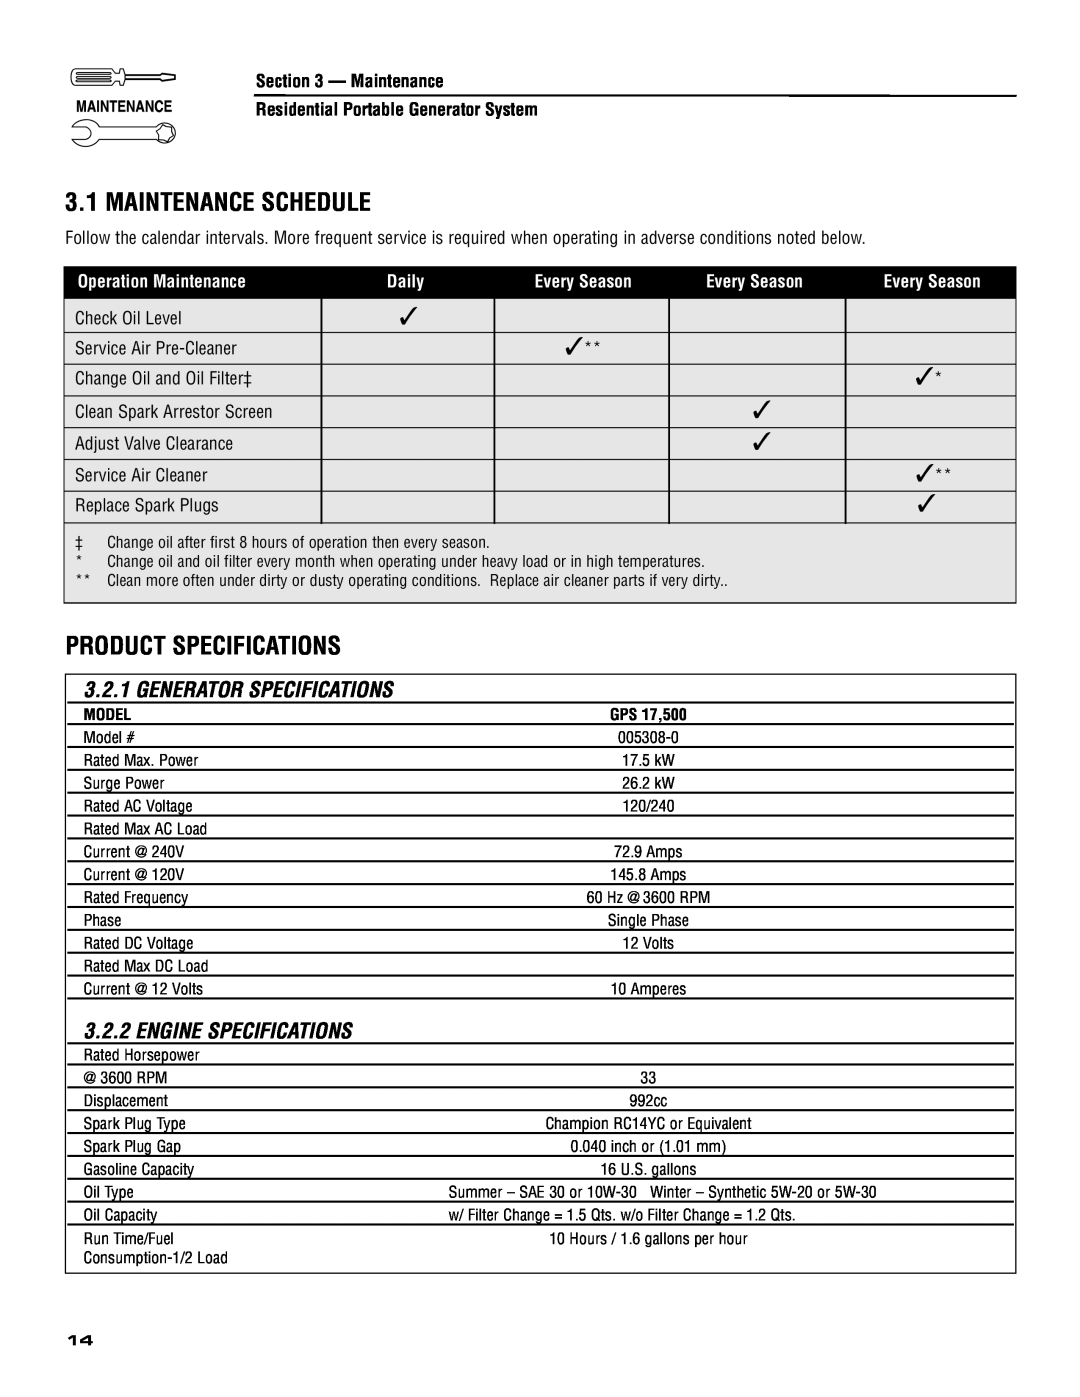 Generac 005308-0 Maintenance Schedule, Product Specifications, Generator Specifications, Engine Specifications, Daily 